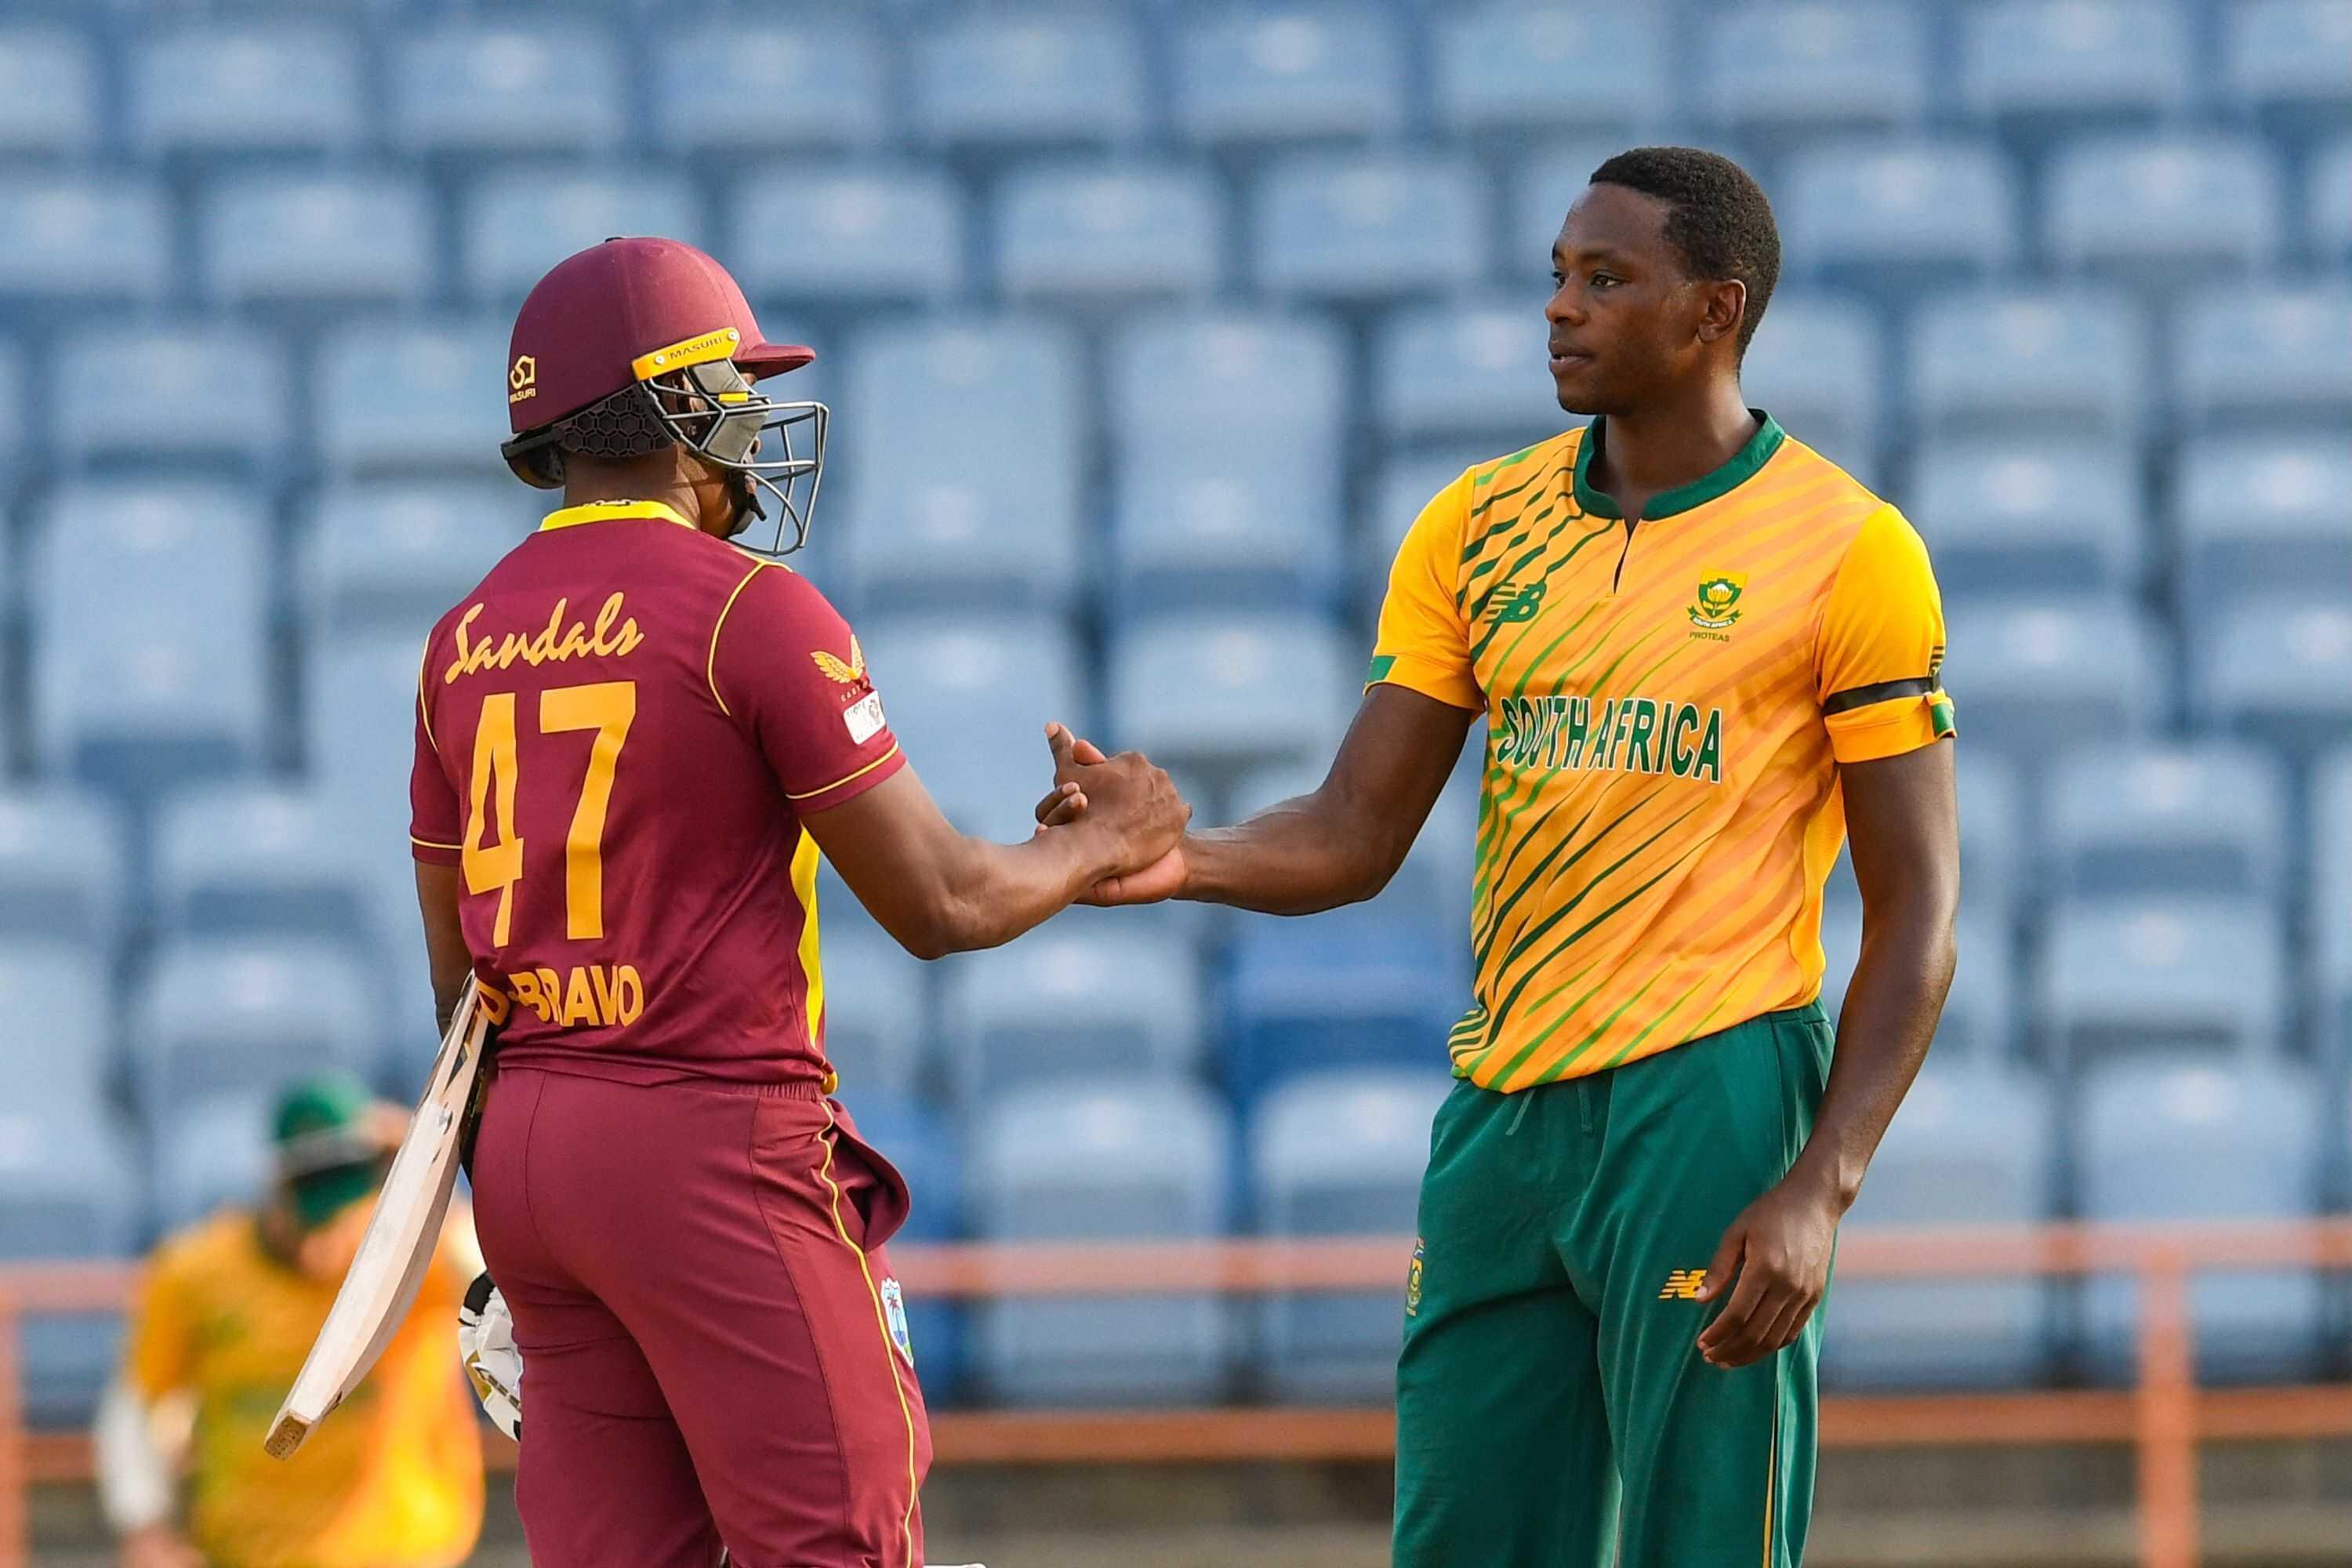 Despite the away win in the Caribbean, South Africa have some glaring issues to fix